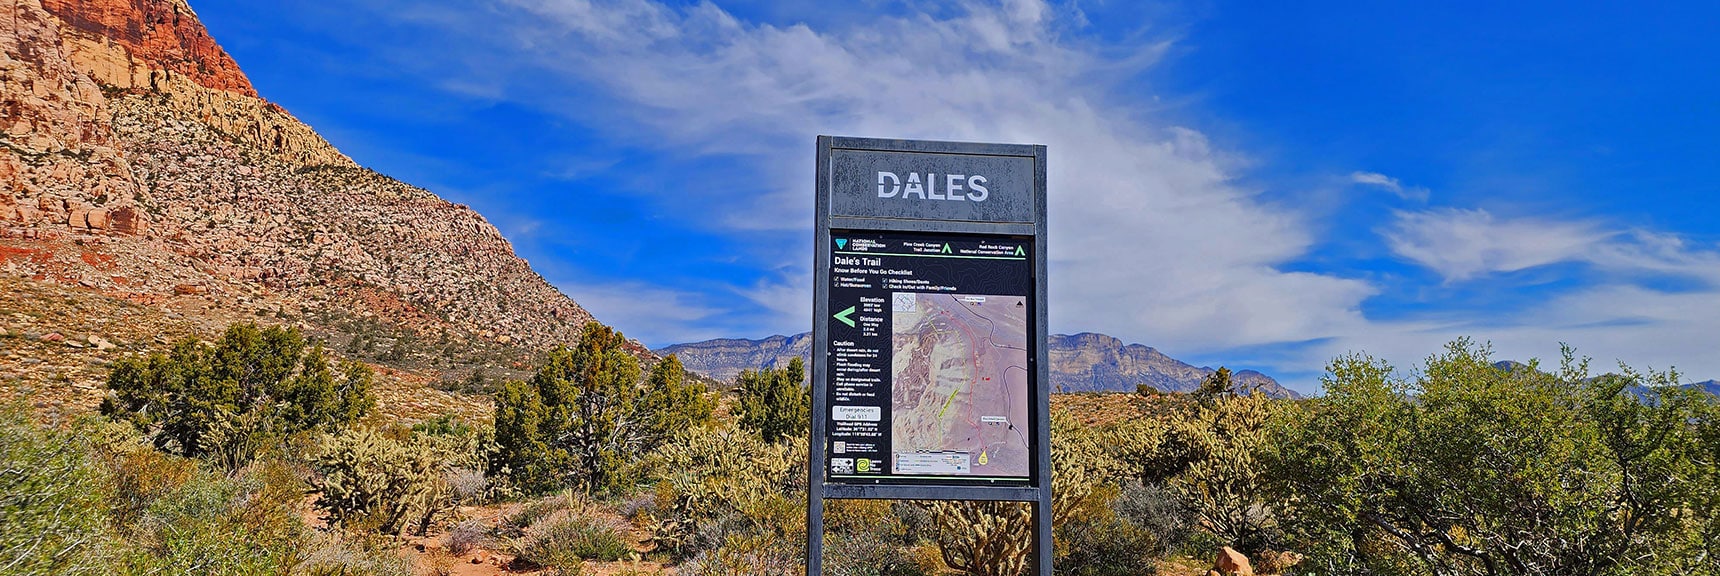 Dales Southern Trailhead Off The Pine Creek Canyon Trail | Dales Trail | Red Rock Canyon National Conservation Area, Nevada | David Smith | LasVegasAreaTrails.com